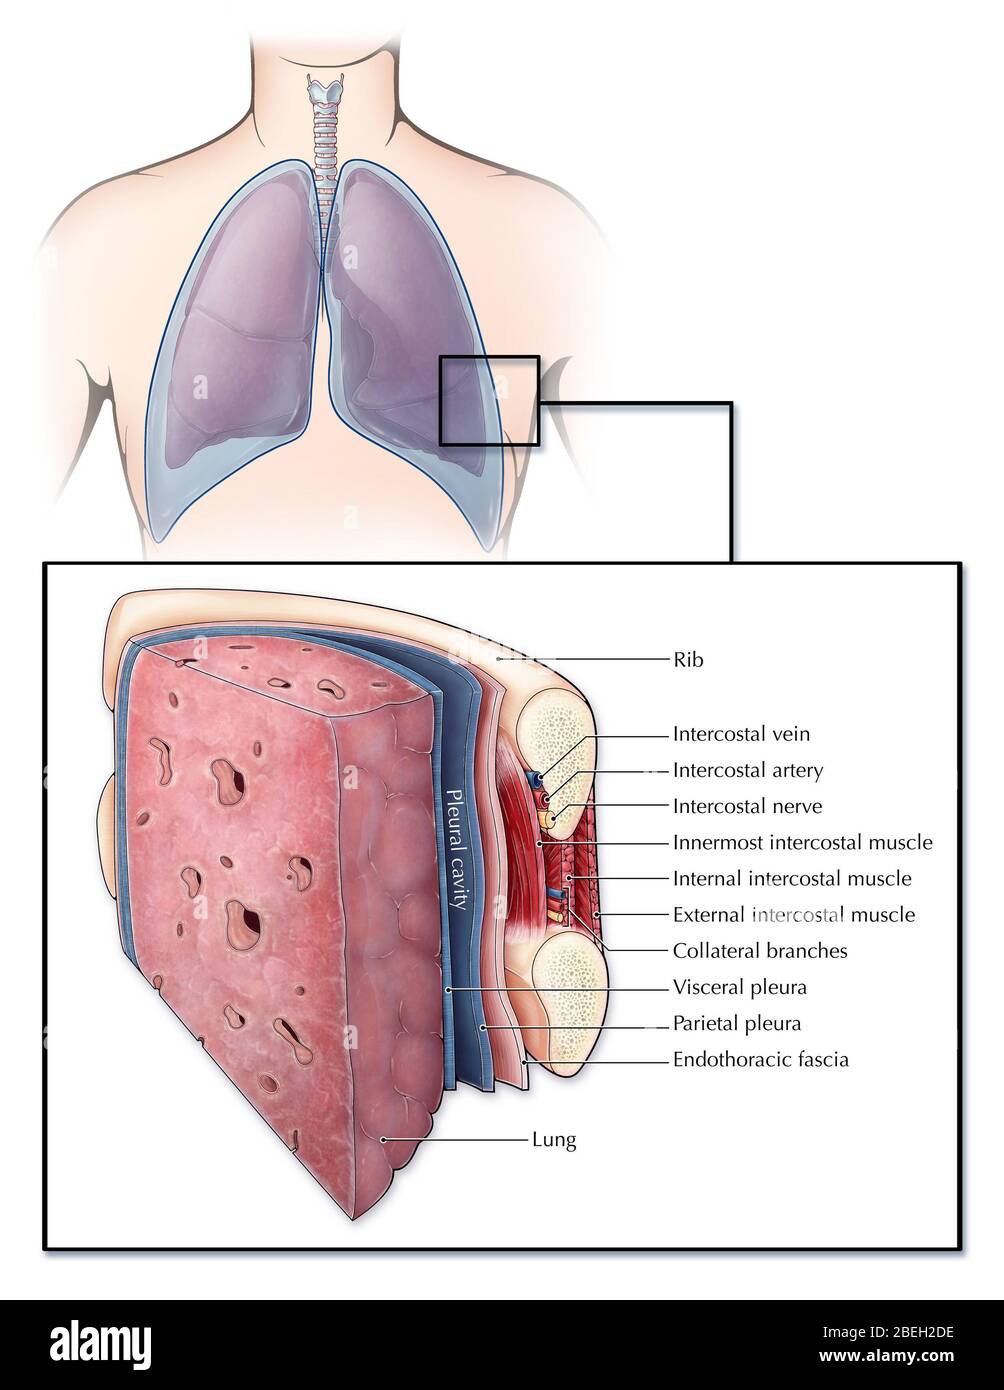 An illustrated section of a lung and the ribcage showcasing different layers of tissue and muscle. The pleura (blue) is a serous membrane covering the lungs (visceral pleura) and chest wall (parietal pleura), creating a fluid filled space (pleural cavity) which lubricates the lungs to aid in breathing. Between each rib are a series of intercostal muscles, arteries, veins and nerves. A layer of endothoracic fascia also lines the inner surface of the ribcage. Stock Photo